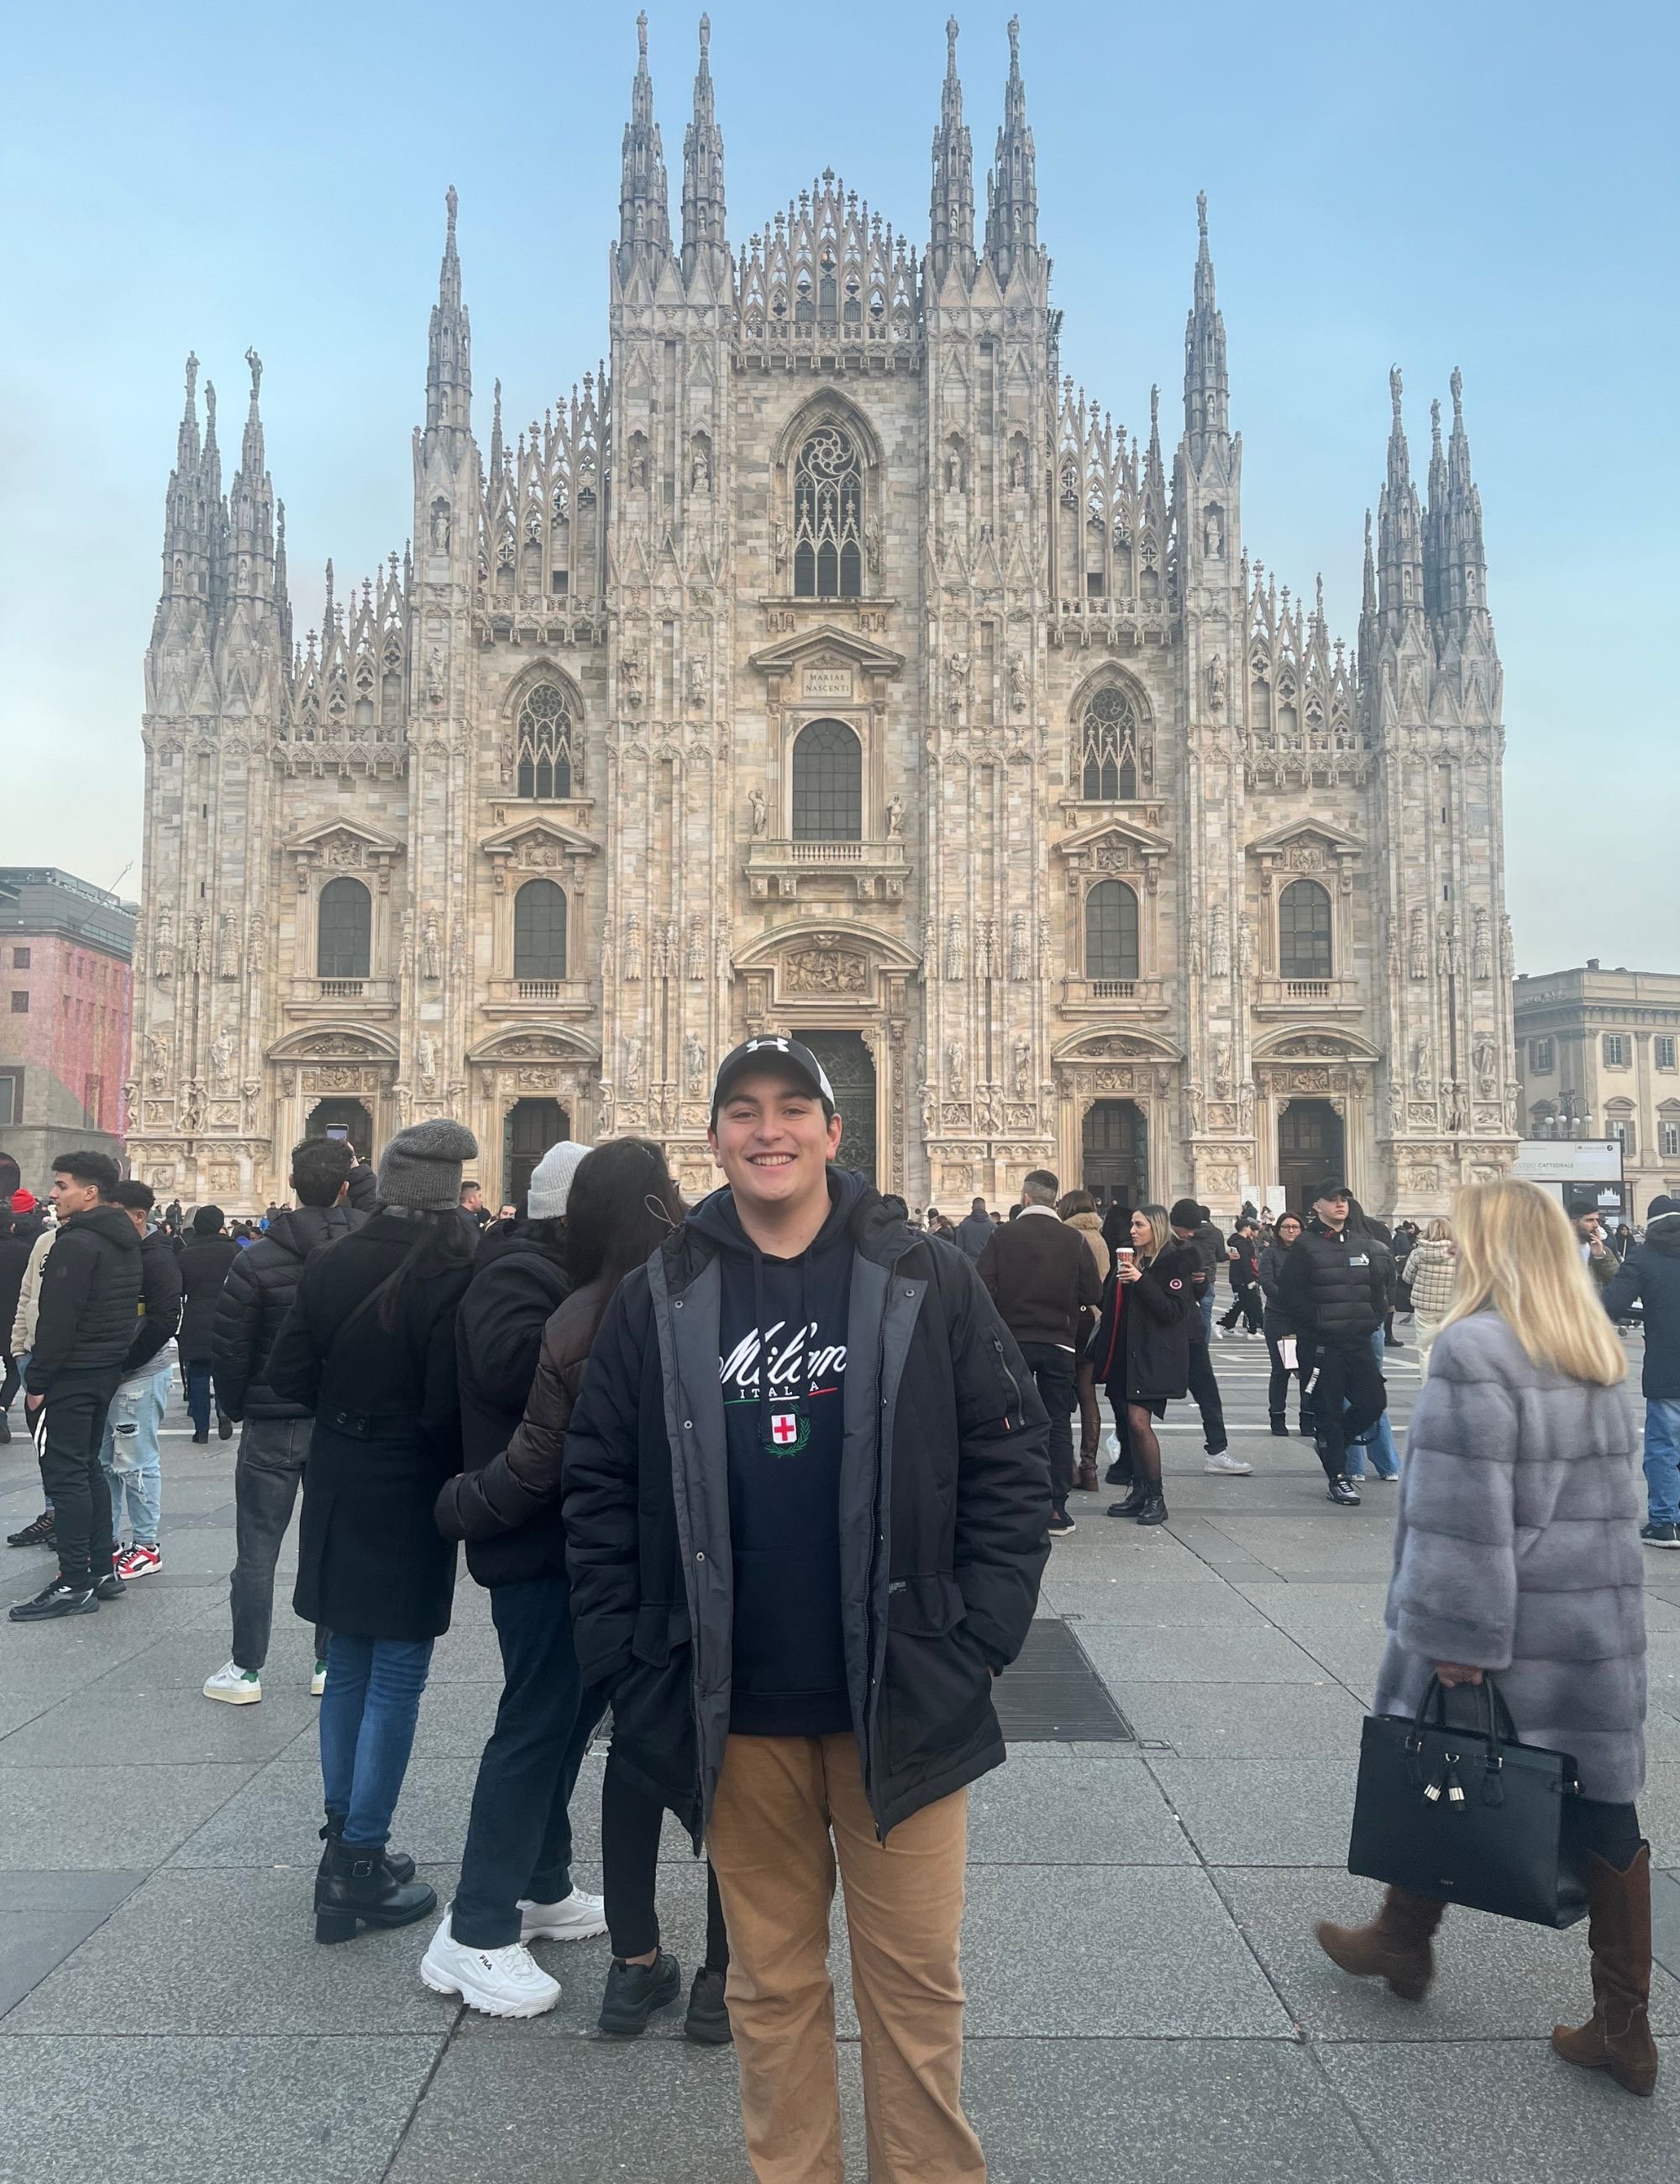 My last time seeing the Duomo di Milano, one of my favorite spots in the city.